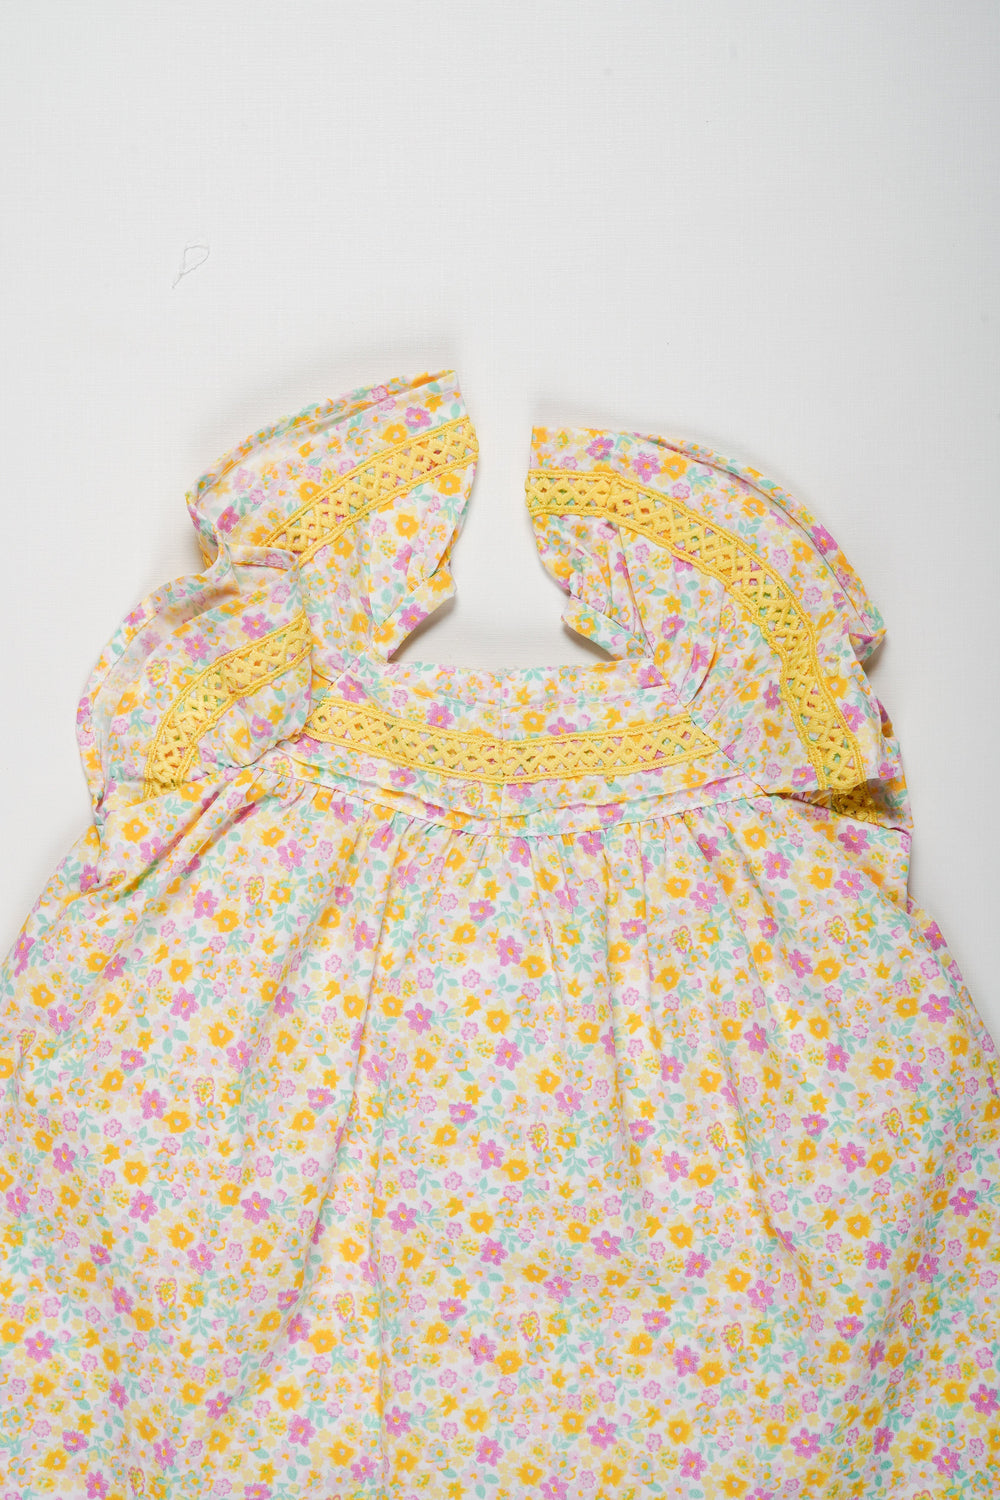 The Nesavu Baby Cotton Frocks Charming Floral Cotton Frock for Baby Girls Nesavu Buy Baby Girl Floral Cotton Dress Online | Trendy and Comfortable Baby Wear | The Nesavu